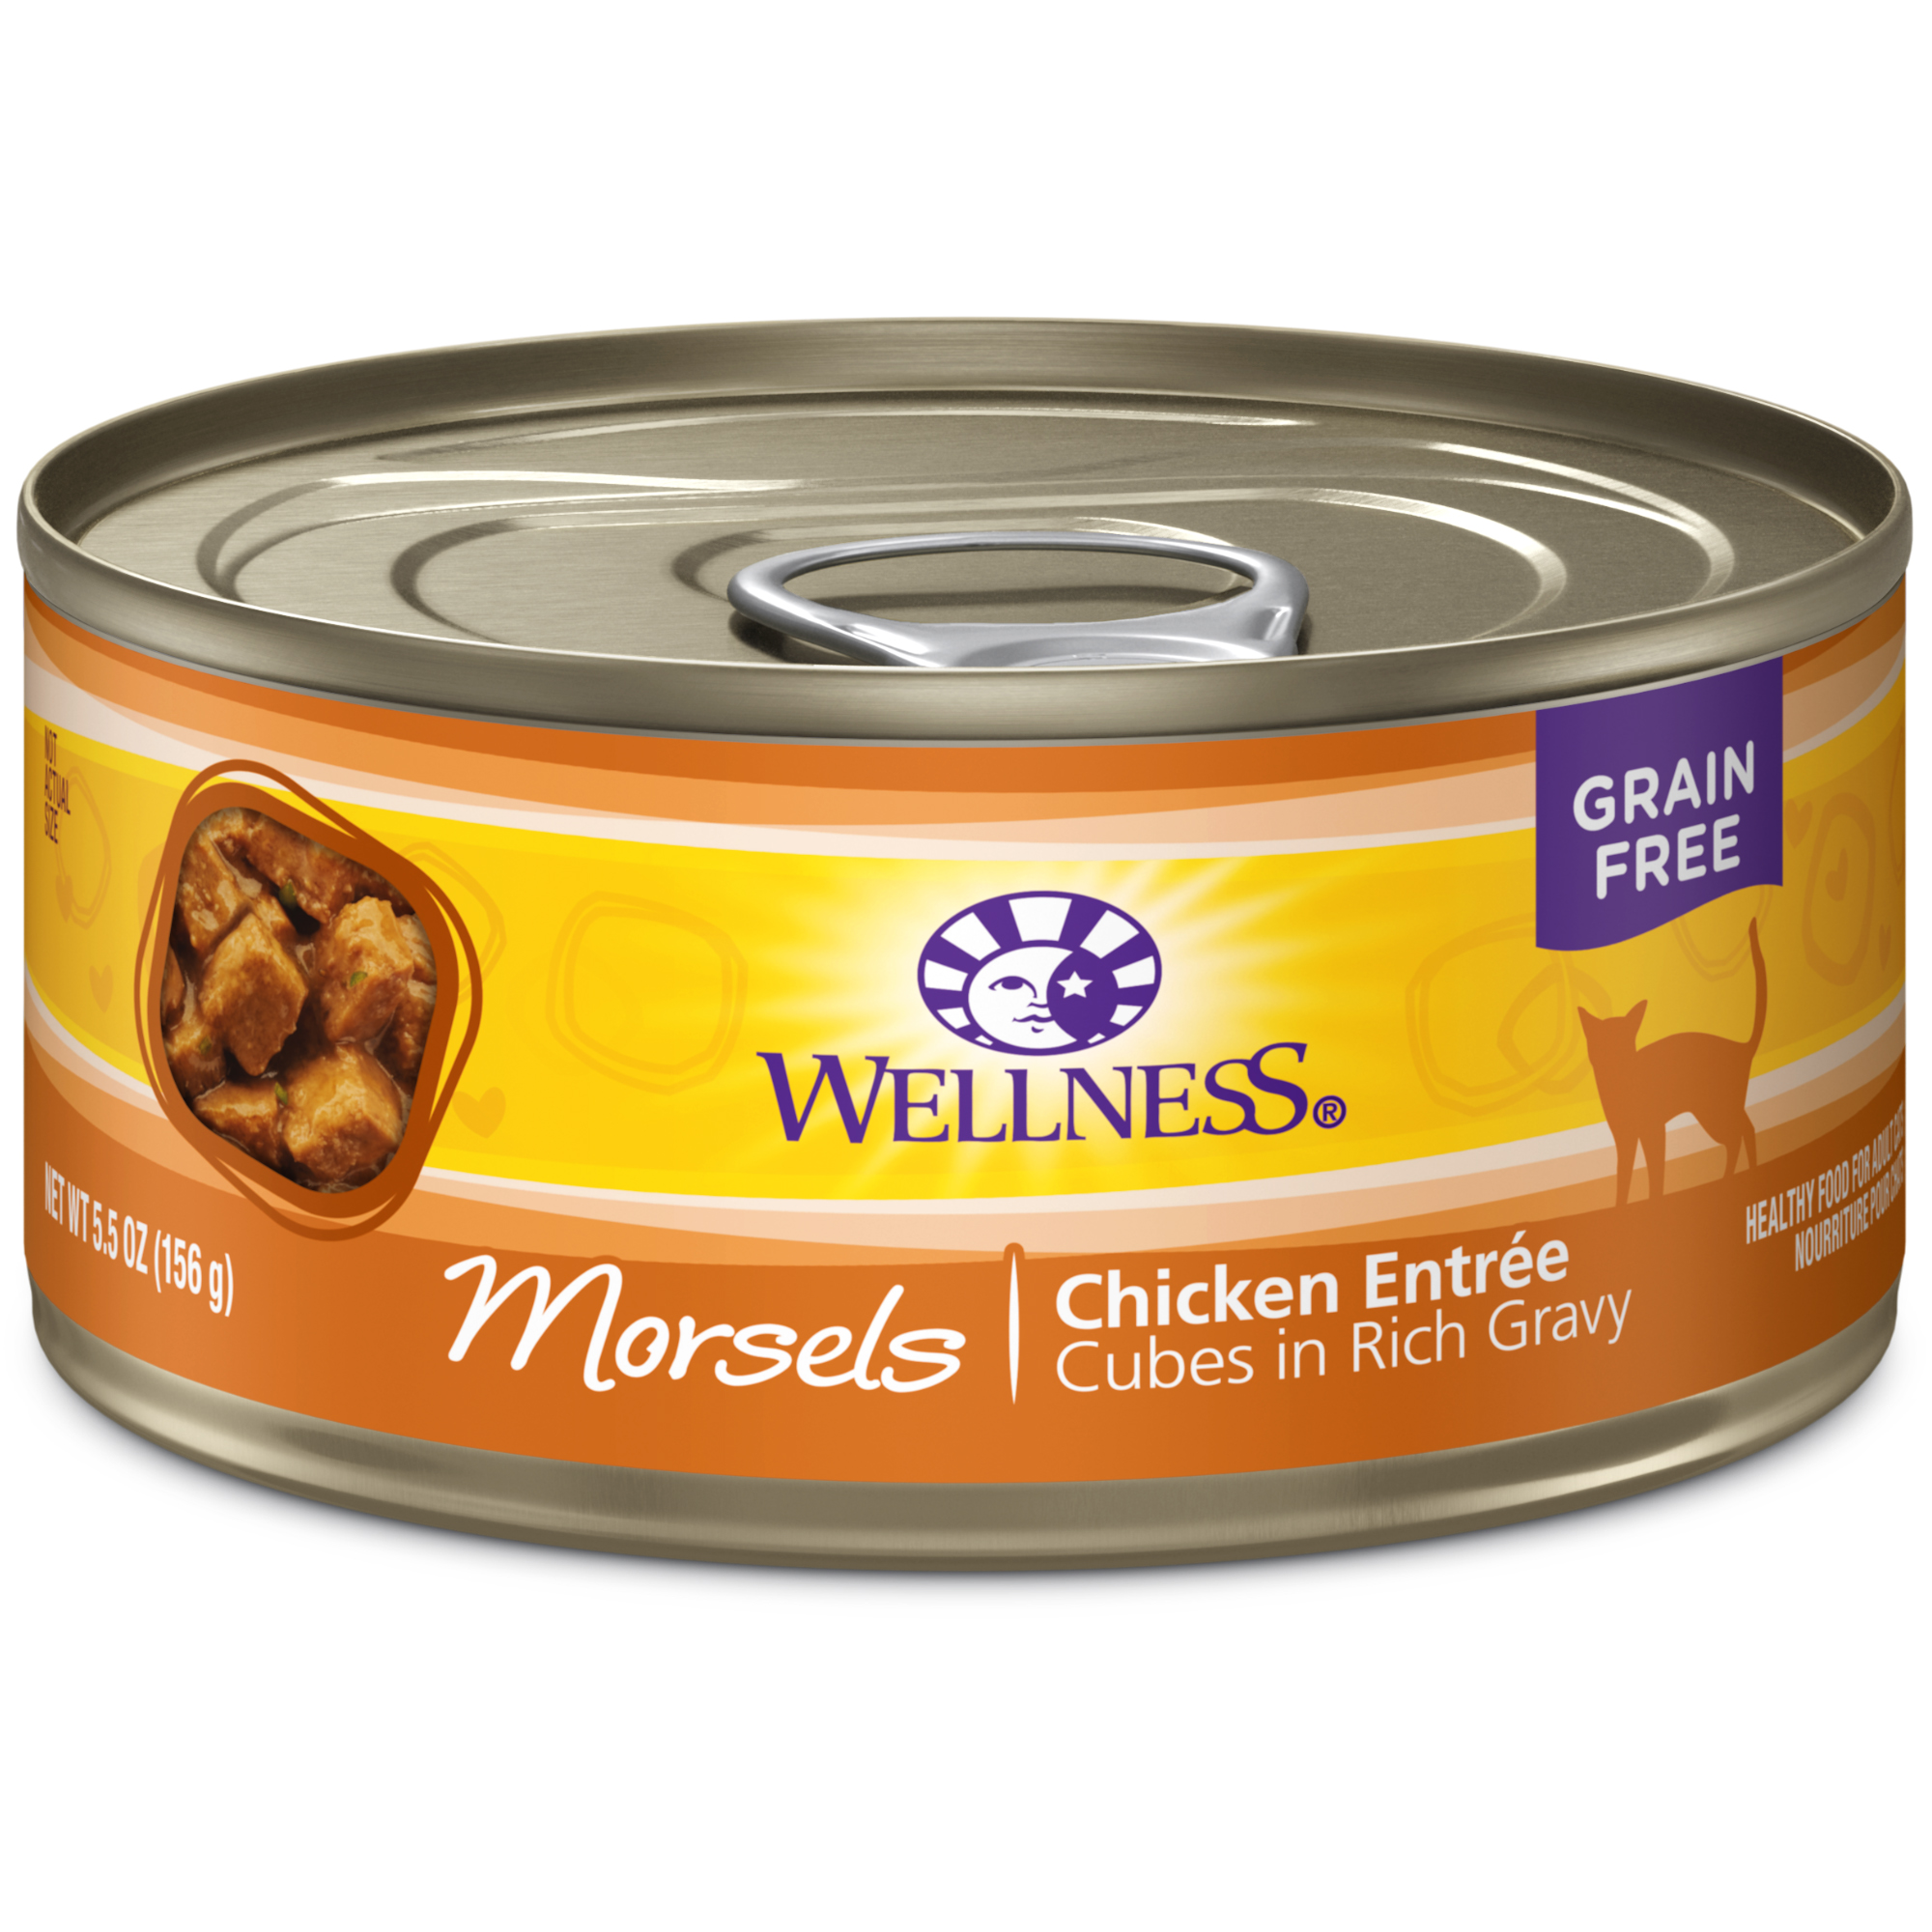 Wellness Complete Health Wet Canned Cat Food, Cubed Chicken Entree, 5.5oz Can (Pack of 24) - image 1 of 8